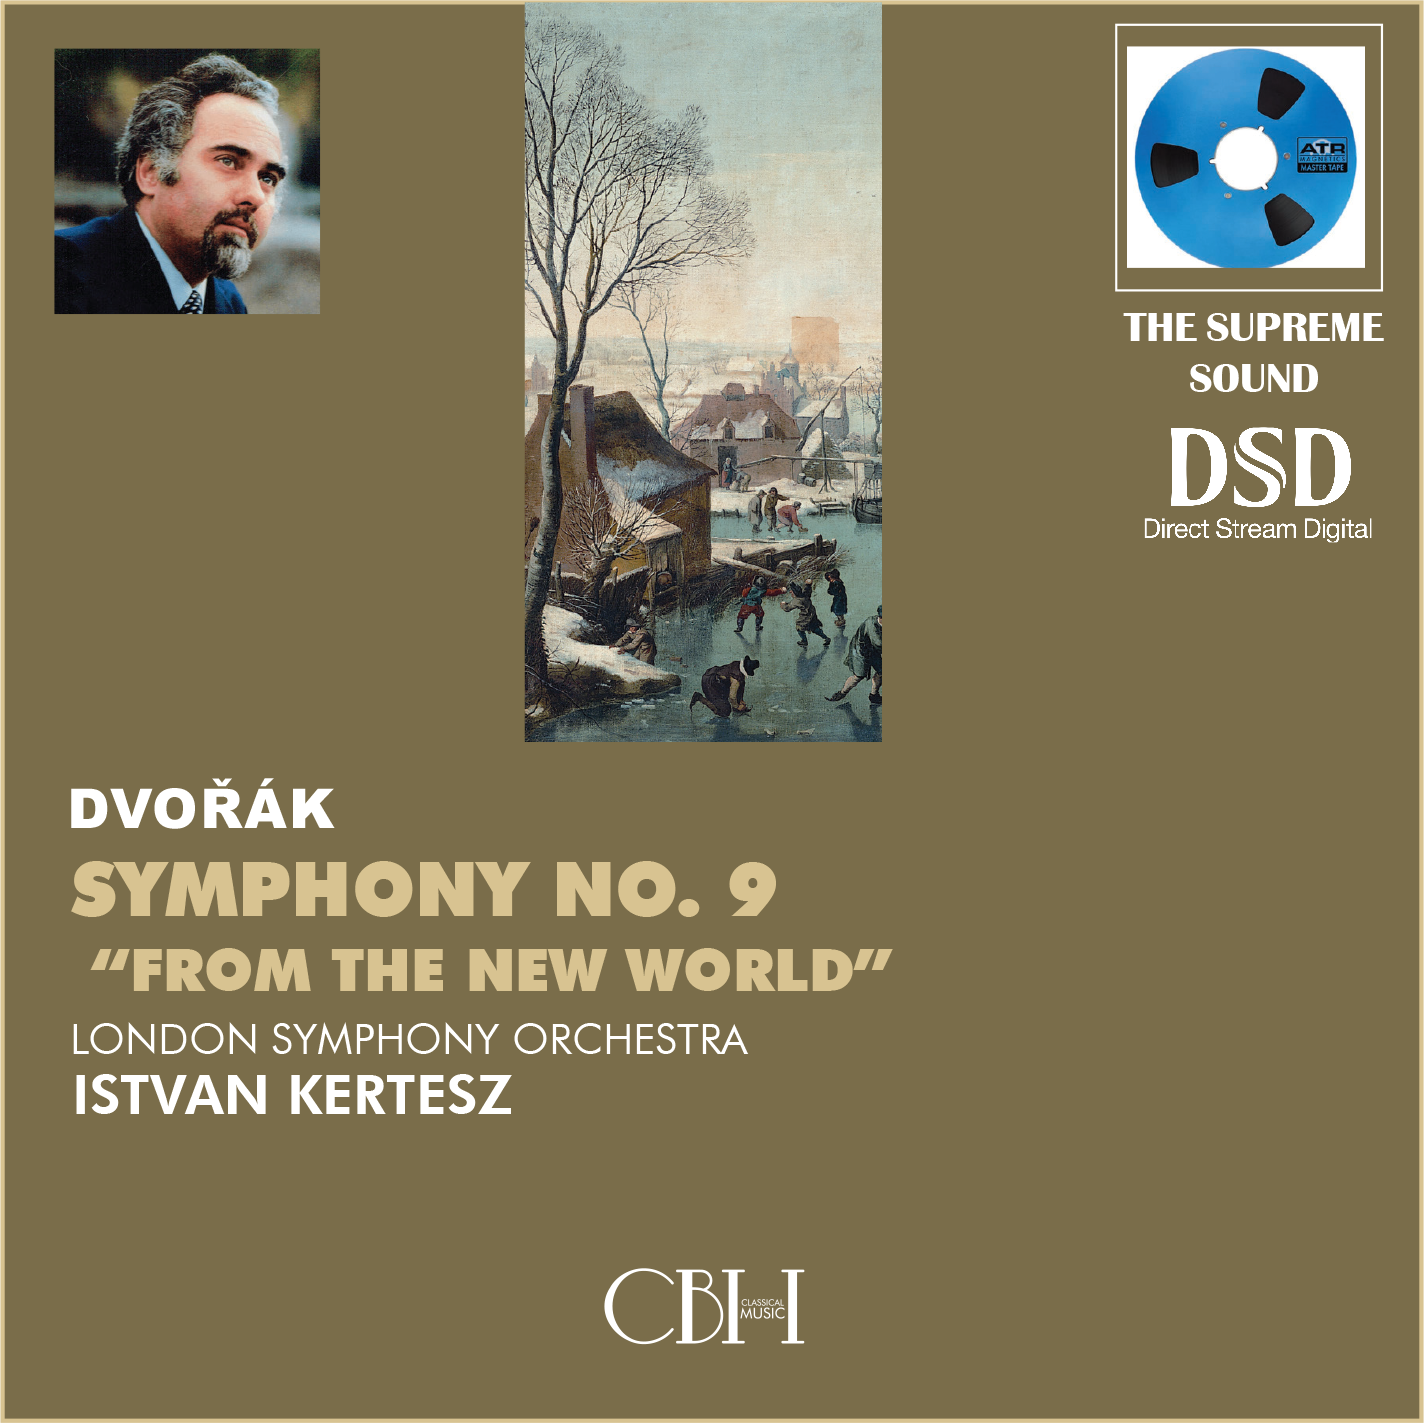 Symphony　in　Minor　CBH　Istvan　the　E　–　Dvořák　95　K　No.　World”-　New　Op.　“From　Music